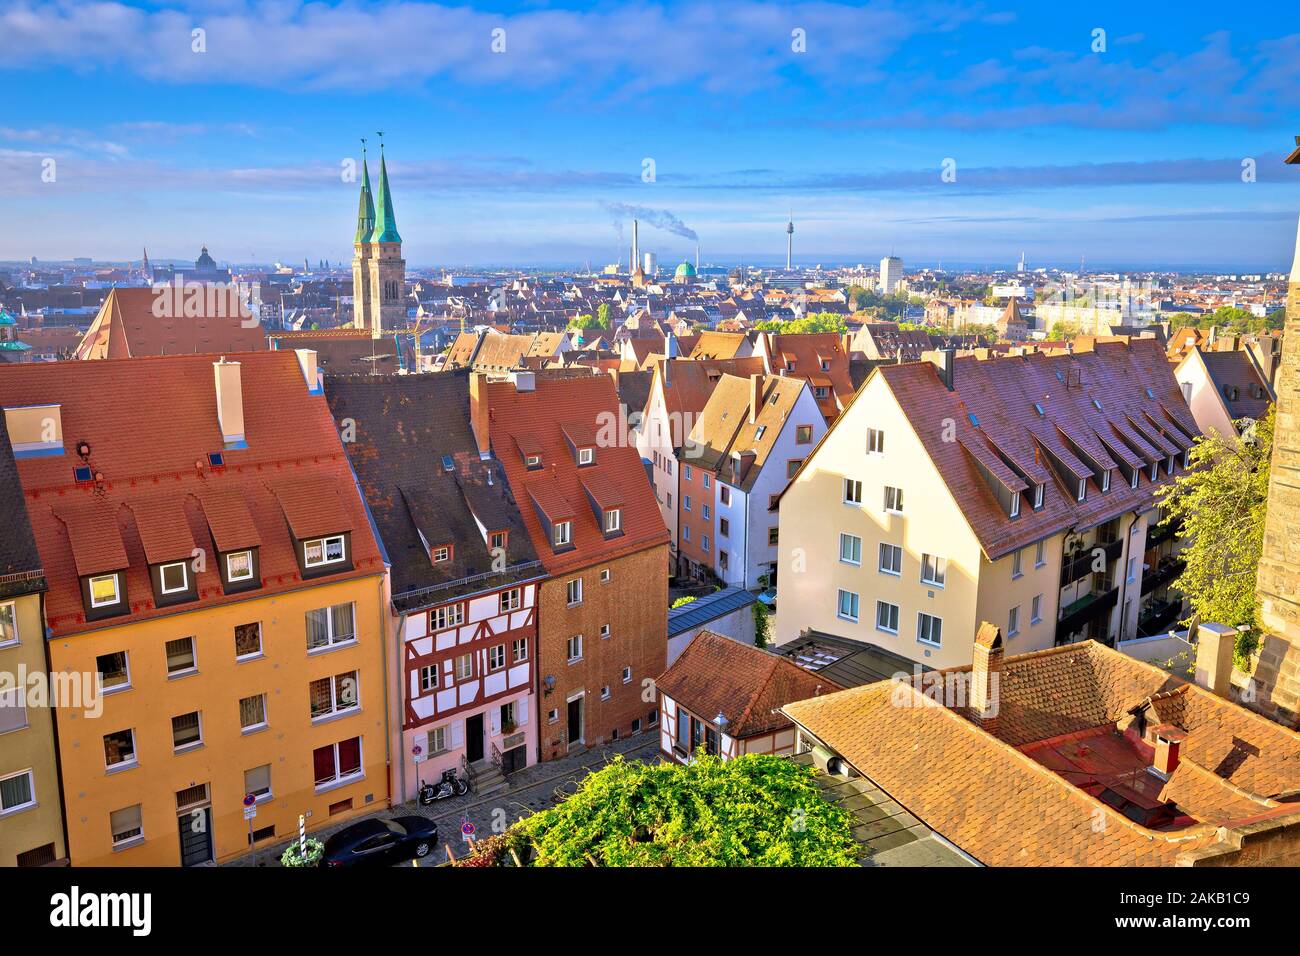 Nurnberg. Rooftops and cityscape of Nuremberg old town view, Bavaria region of Germany Stock Photo